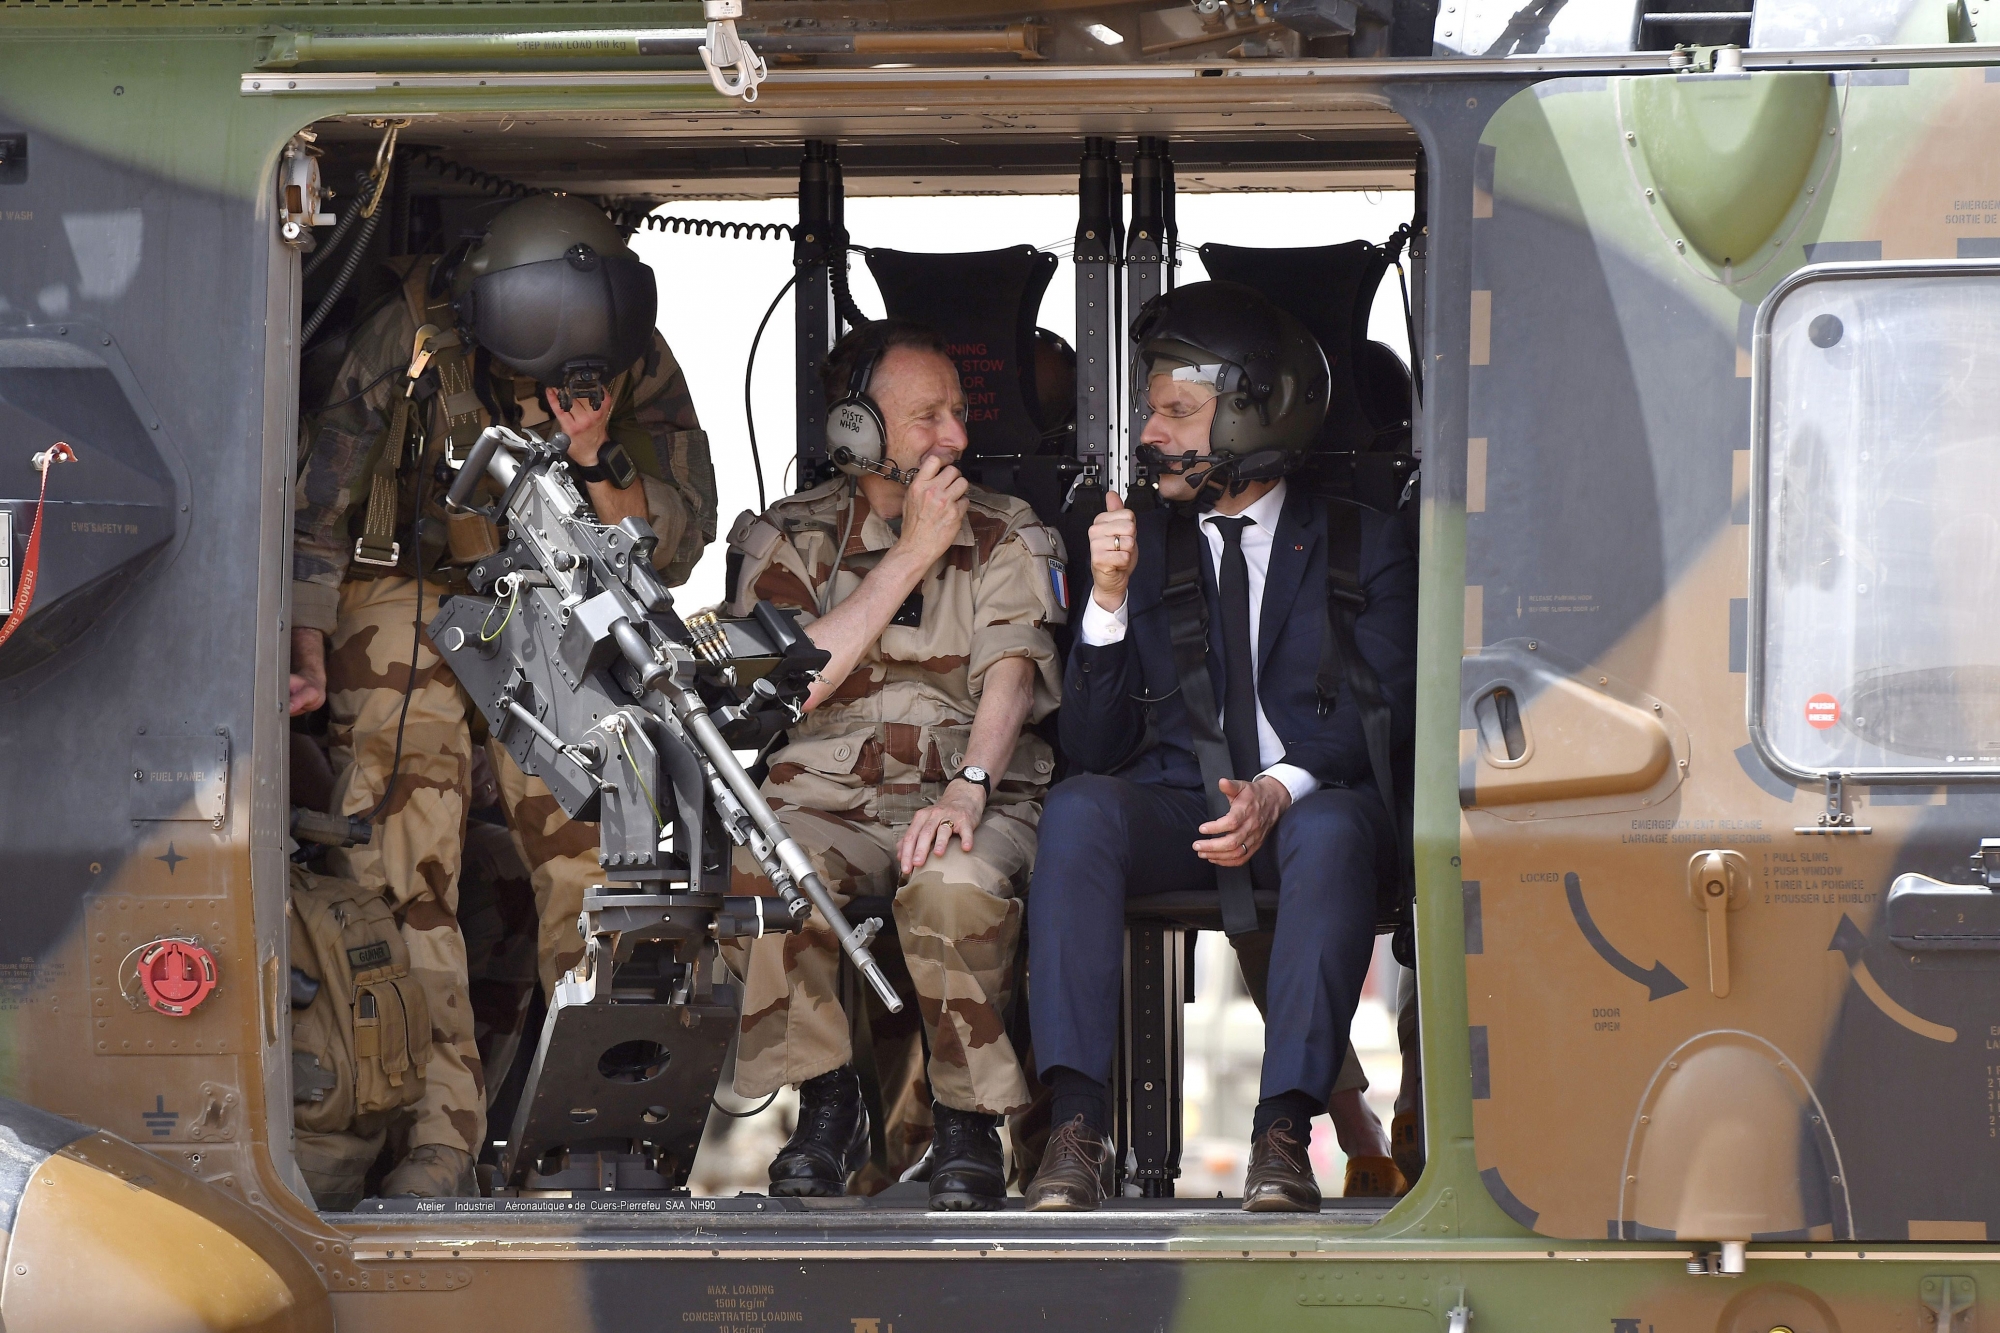 French President Emmanuel Macron, right, takes to Army Chief of Staff, General Pierre de Villiersflies prior to the take off of a military helicopter as they visit the troops of Operation Barkhane, France's largest overseas military operation, in Gao, northern Mali, Friday, May 19, 2017. On his first official trip outside Europe, new French President Emmanuel Macron is highlighting his determination to crush extremism with a visit to French-led military forces combating jihadist groups in West Africa. (Christophe Petit Tesson, Pool via AP) MALI FRANCE PRESIDENT